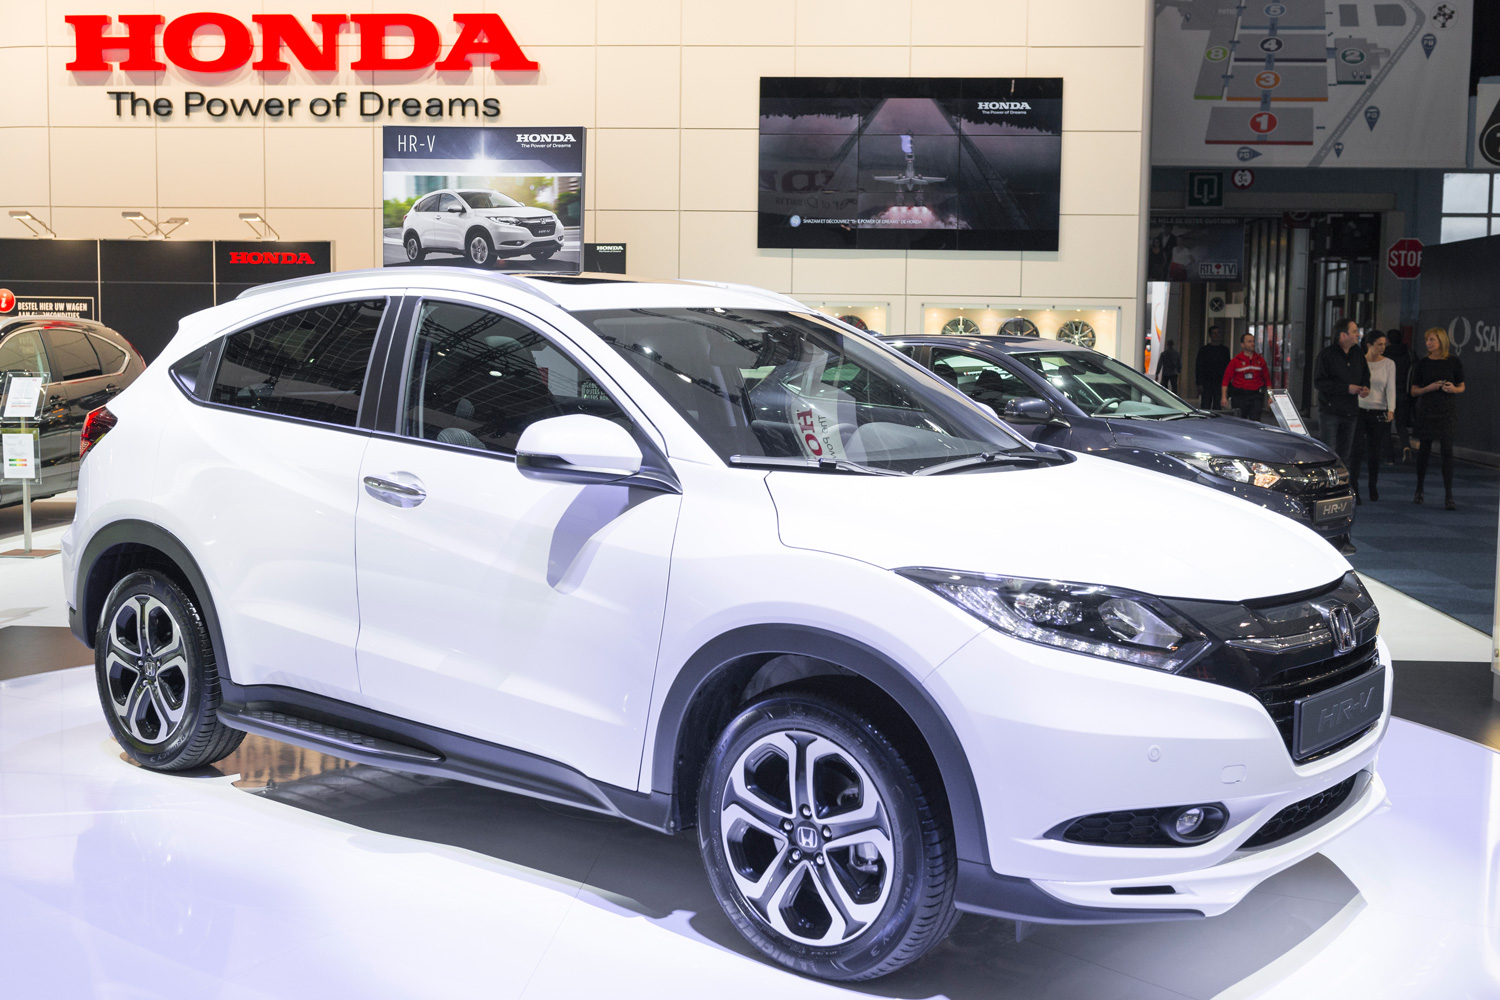 White Honda HR-V compact crossover SUV front view.